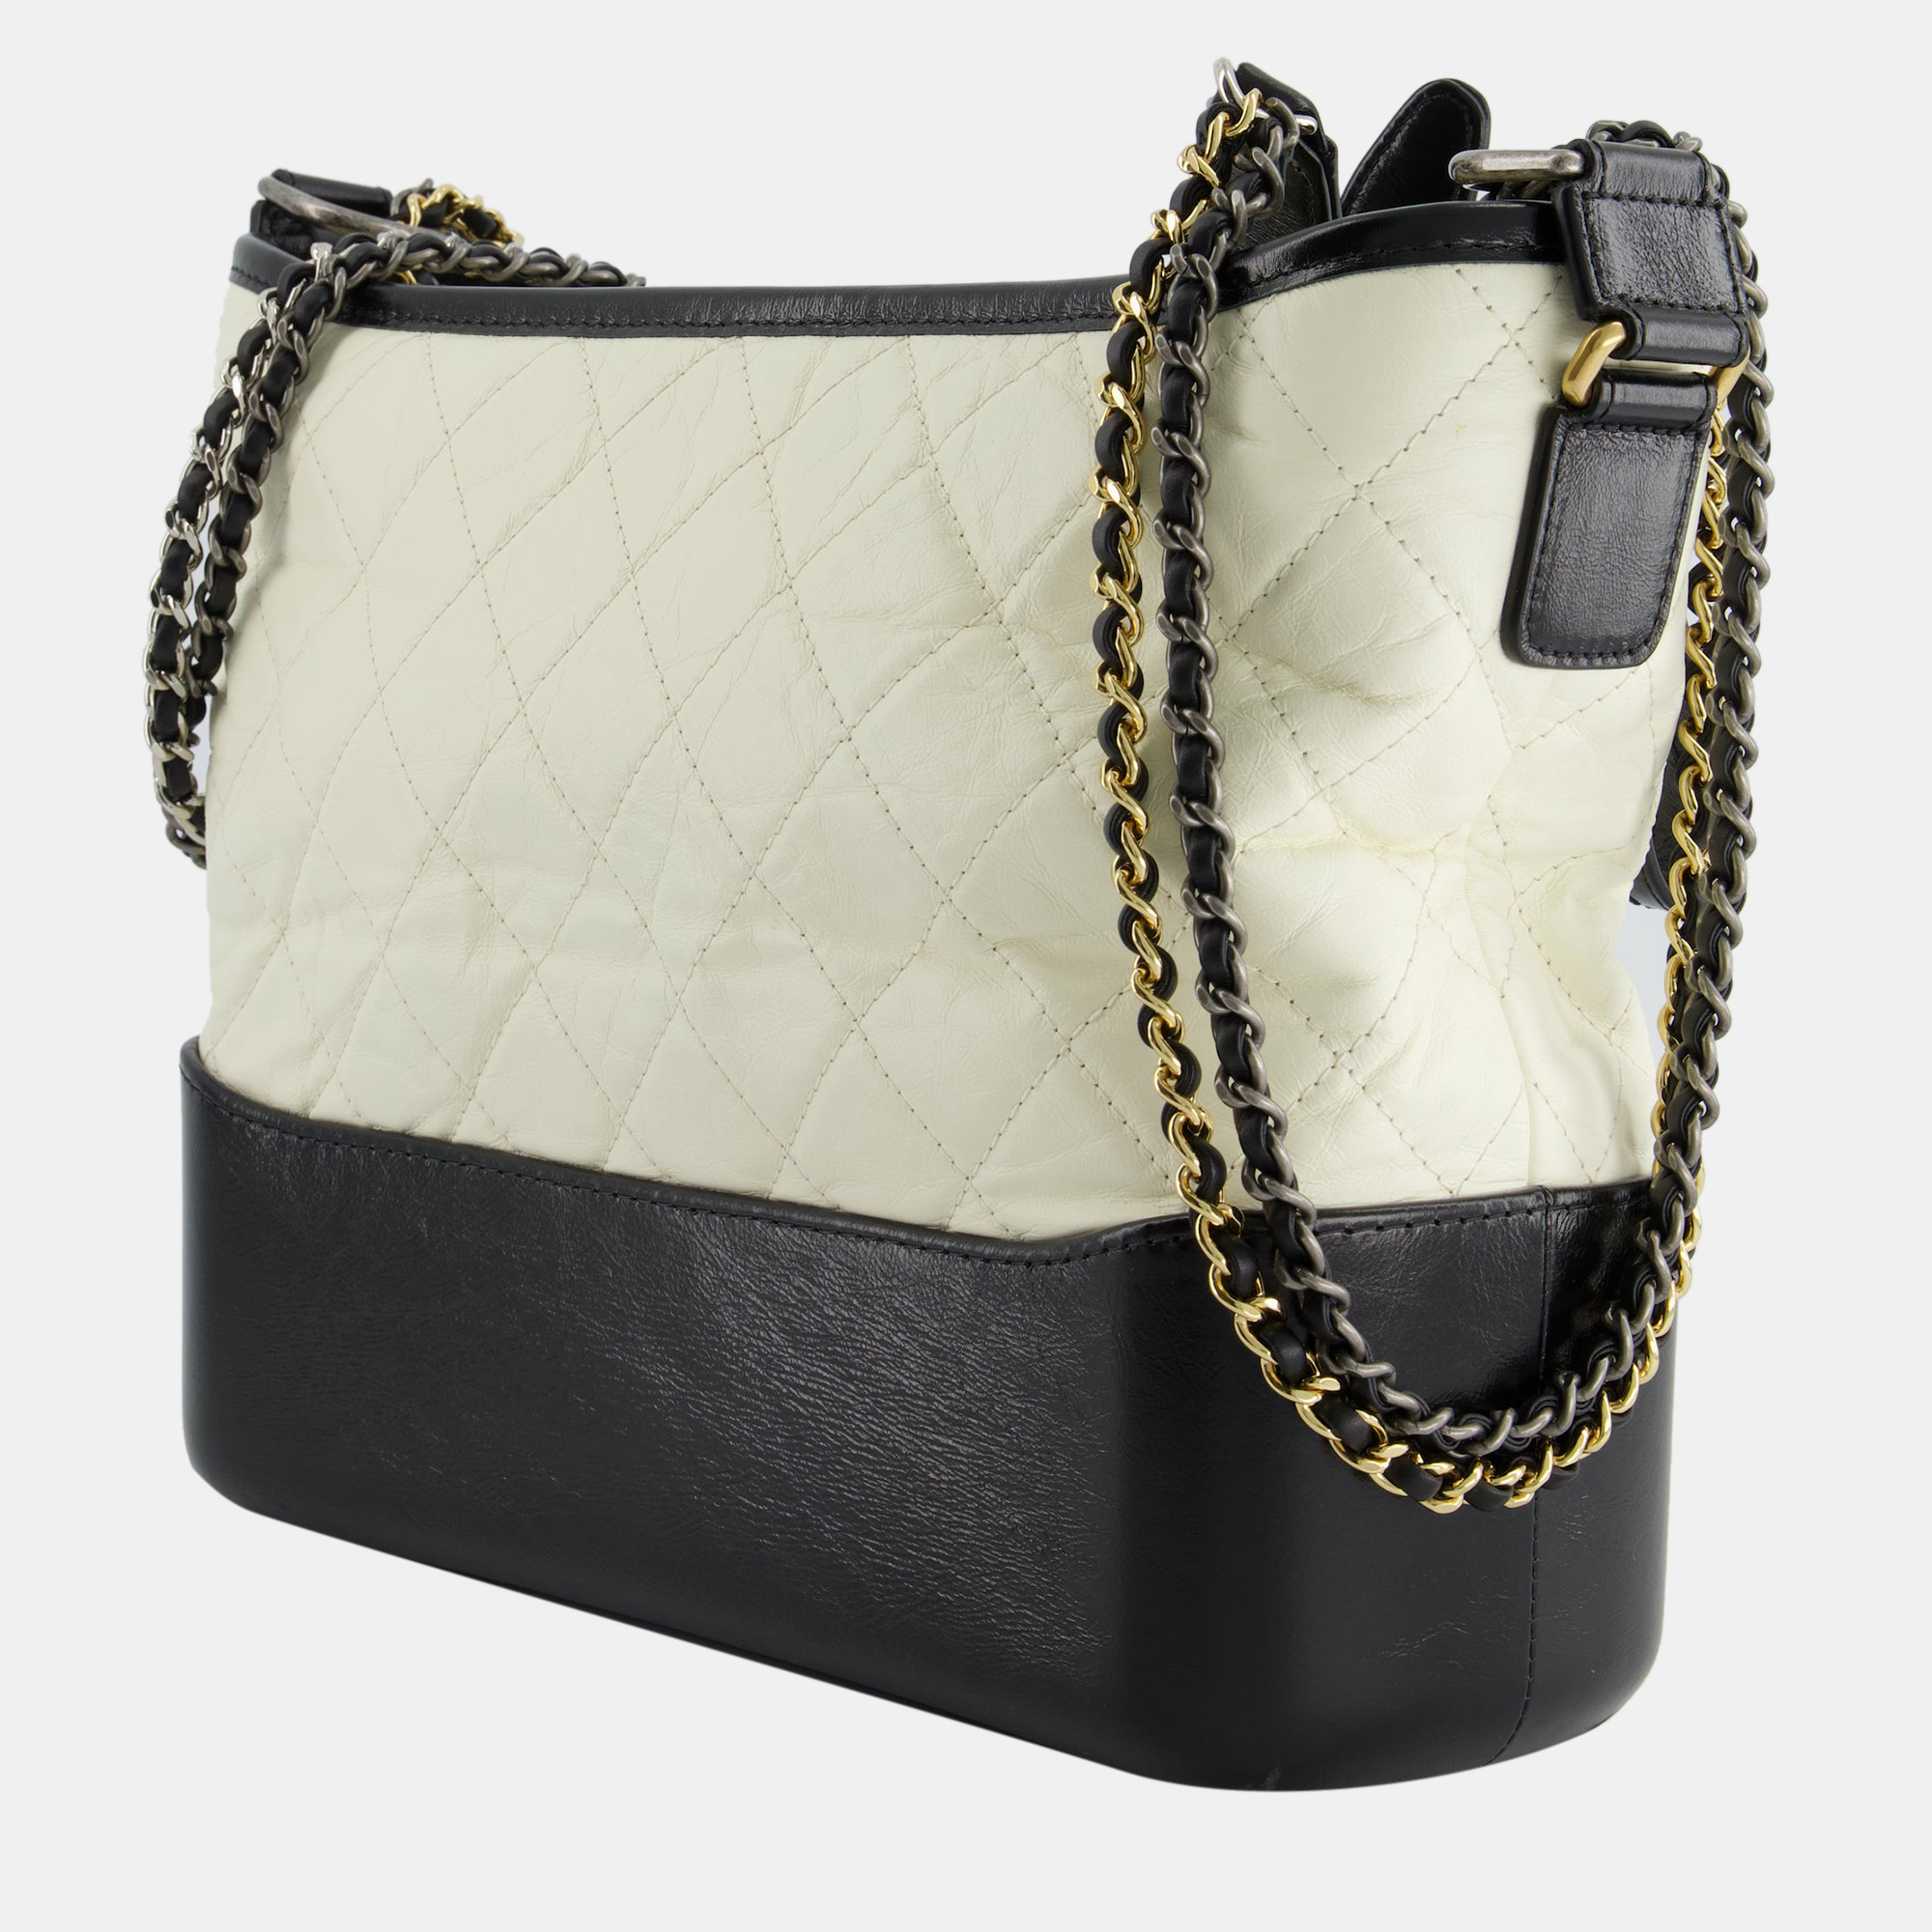 Chanel White And Black Medium Gabrielle Bag In Aged Calfskin Leather With Mixed Hardware